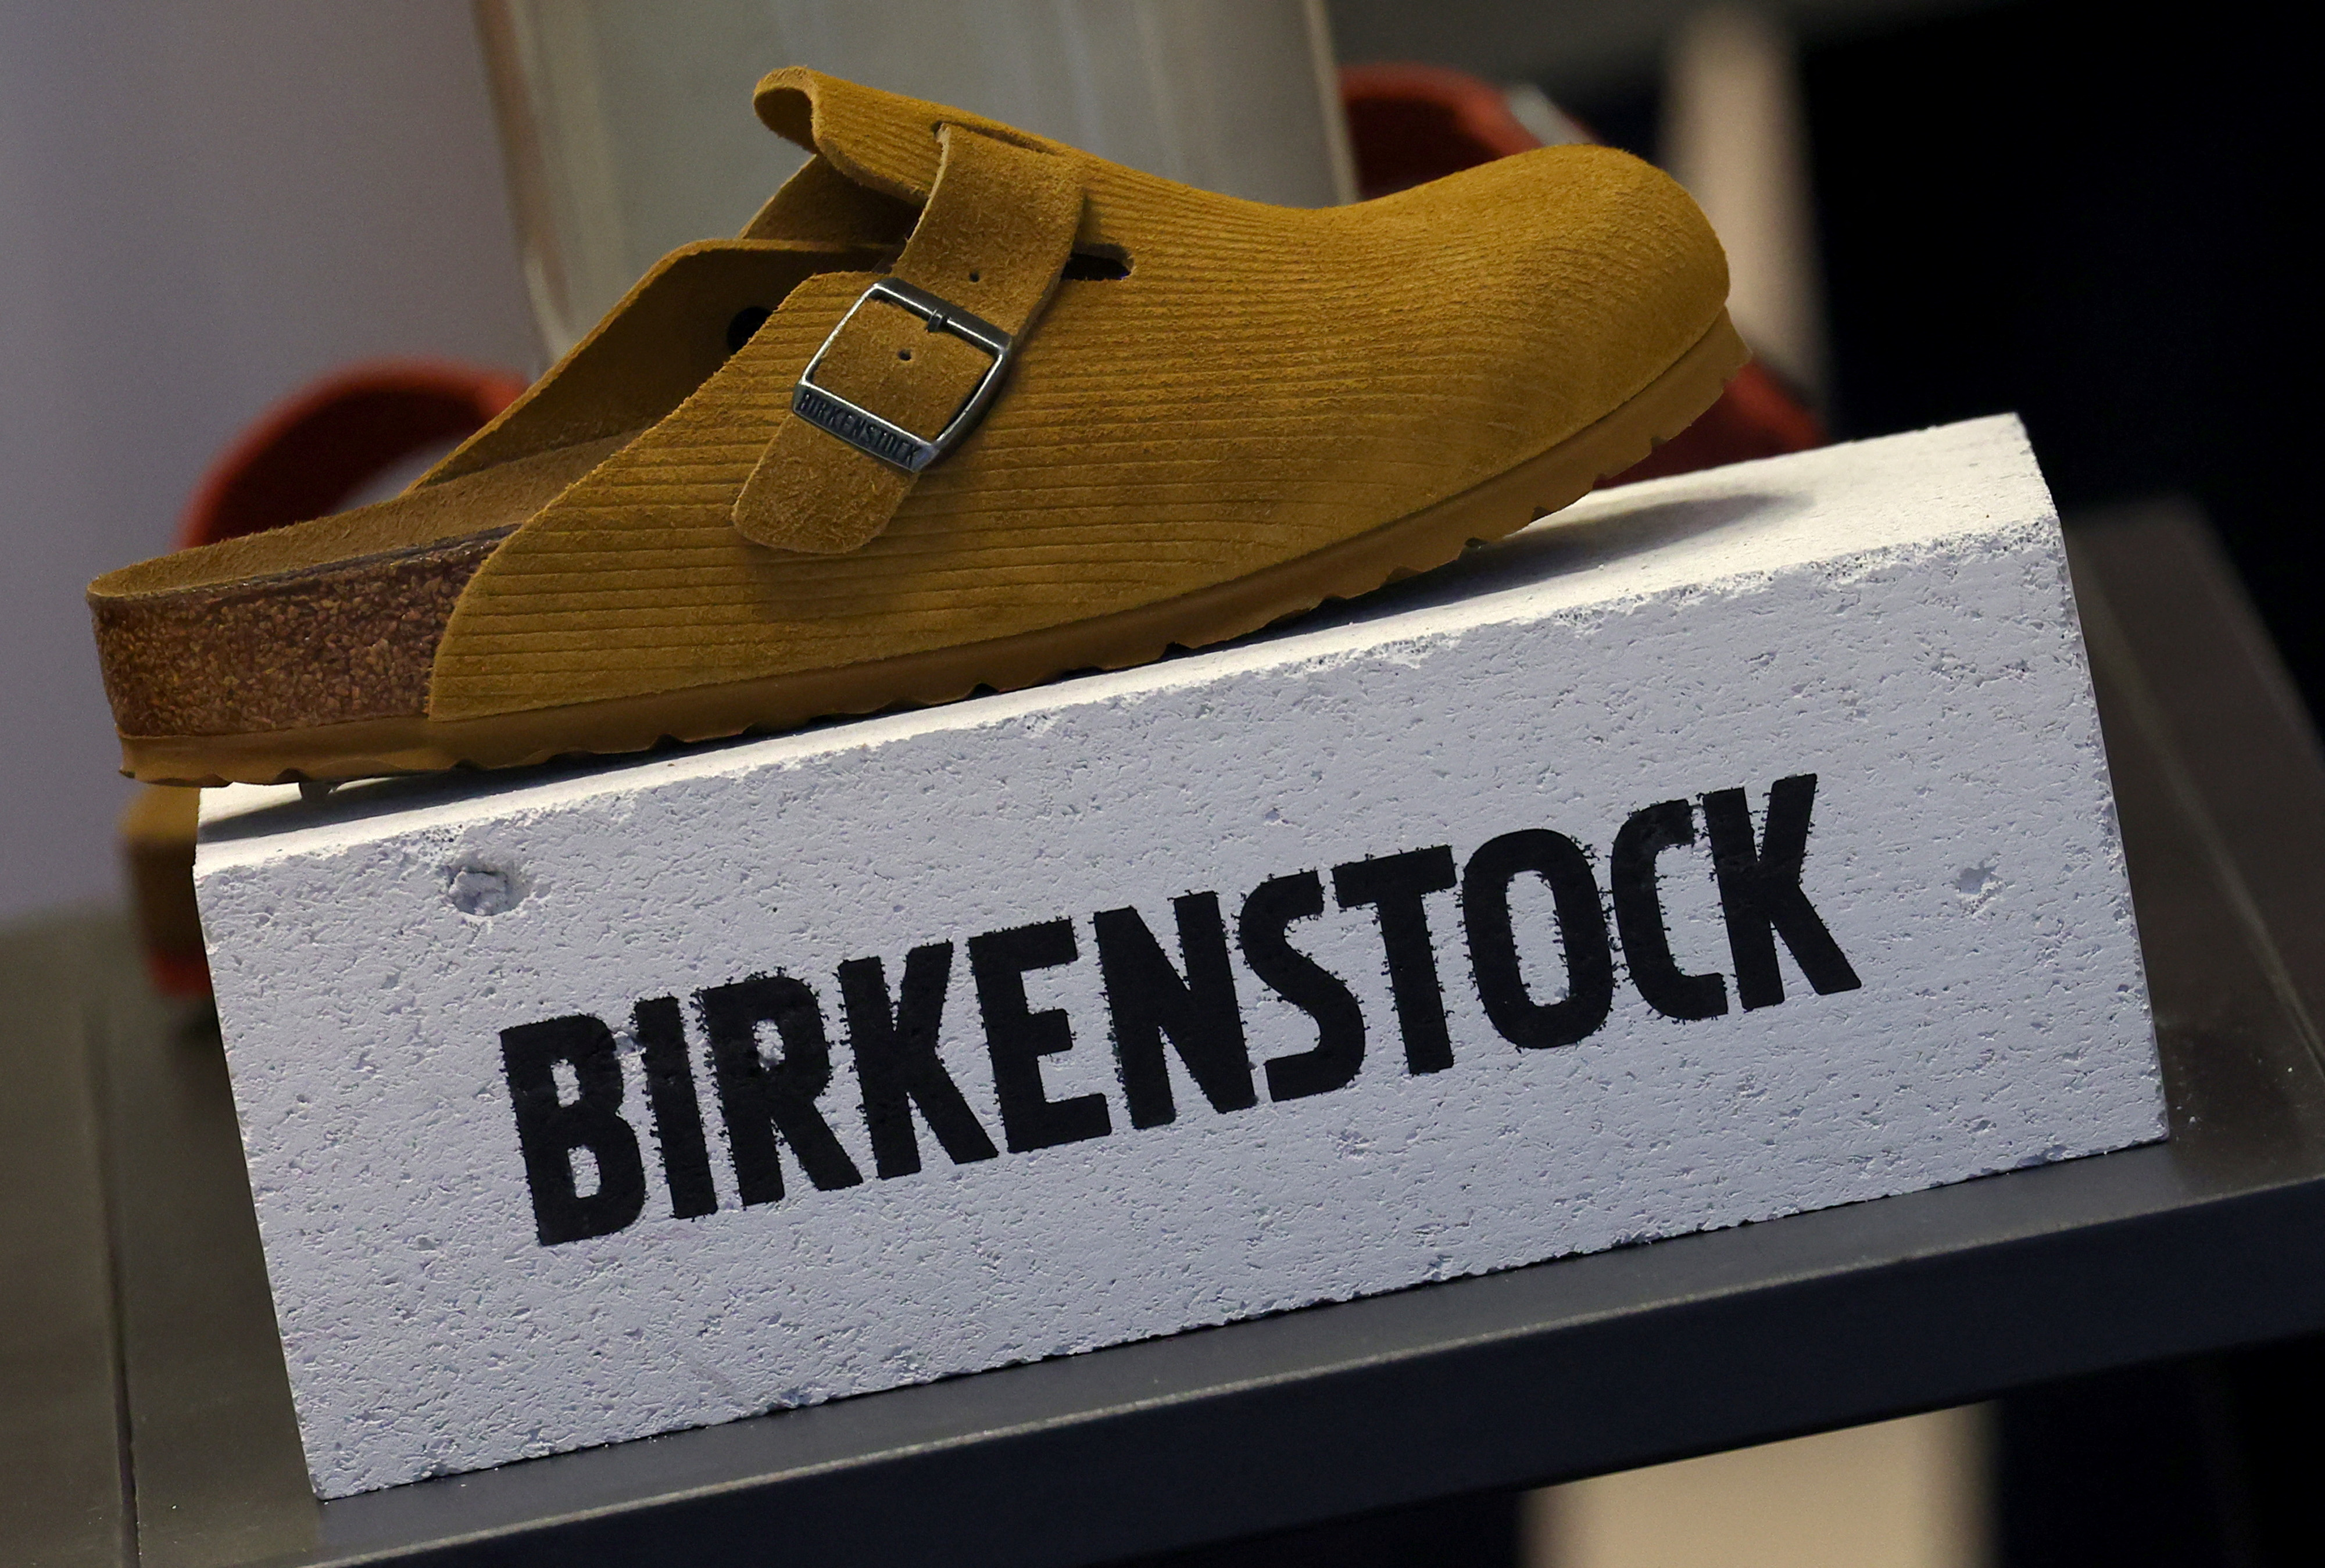 Done deal: Birkenstock switches to L Catterton (LVMH) - LaConceria